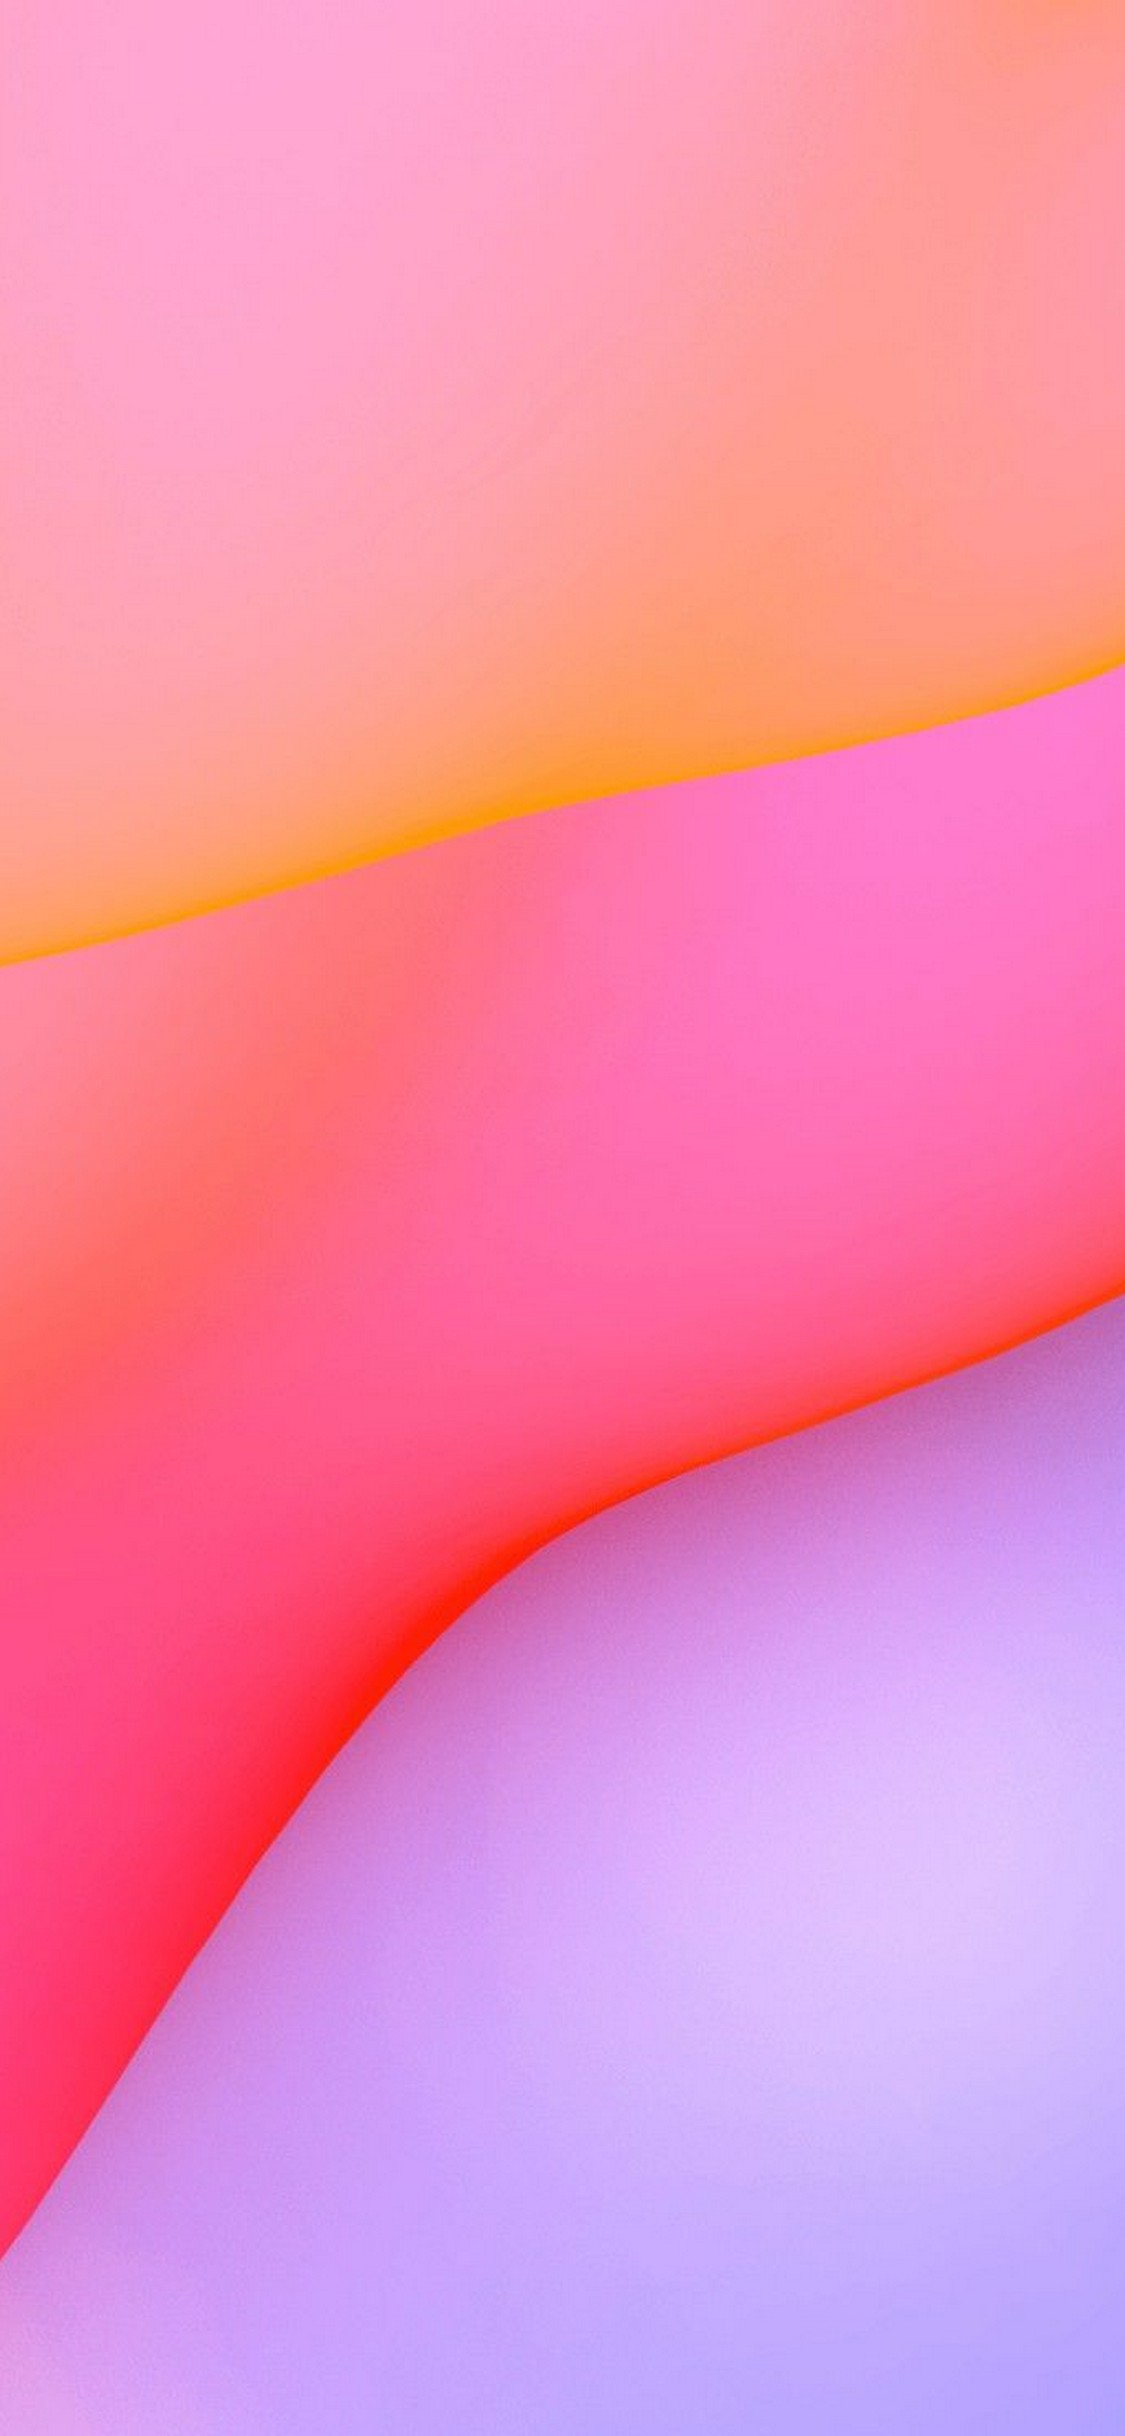 Apple Iphone X Wallpaper With High-resolution Pixel - Pink Iphone X Background - HD Wallpaper 